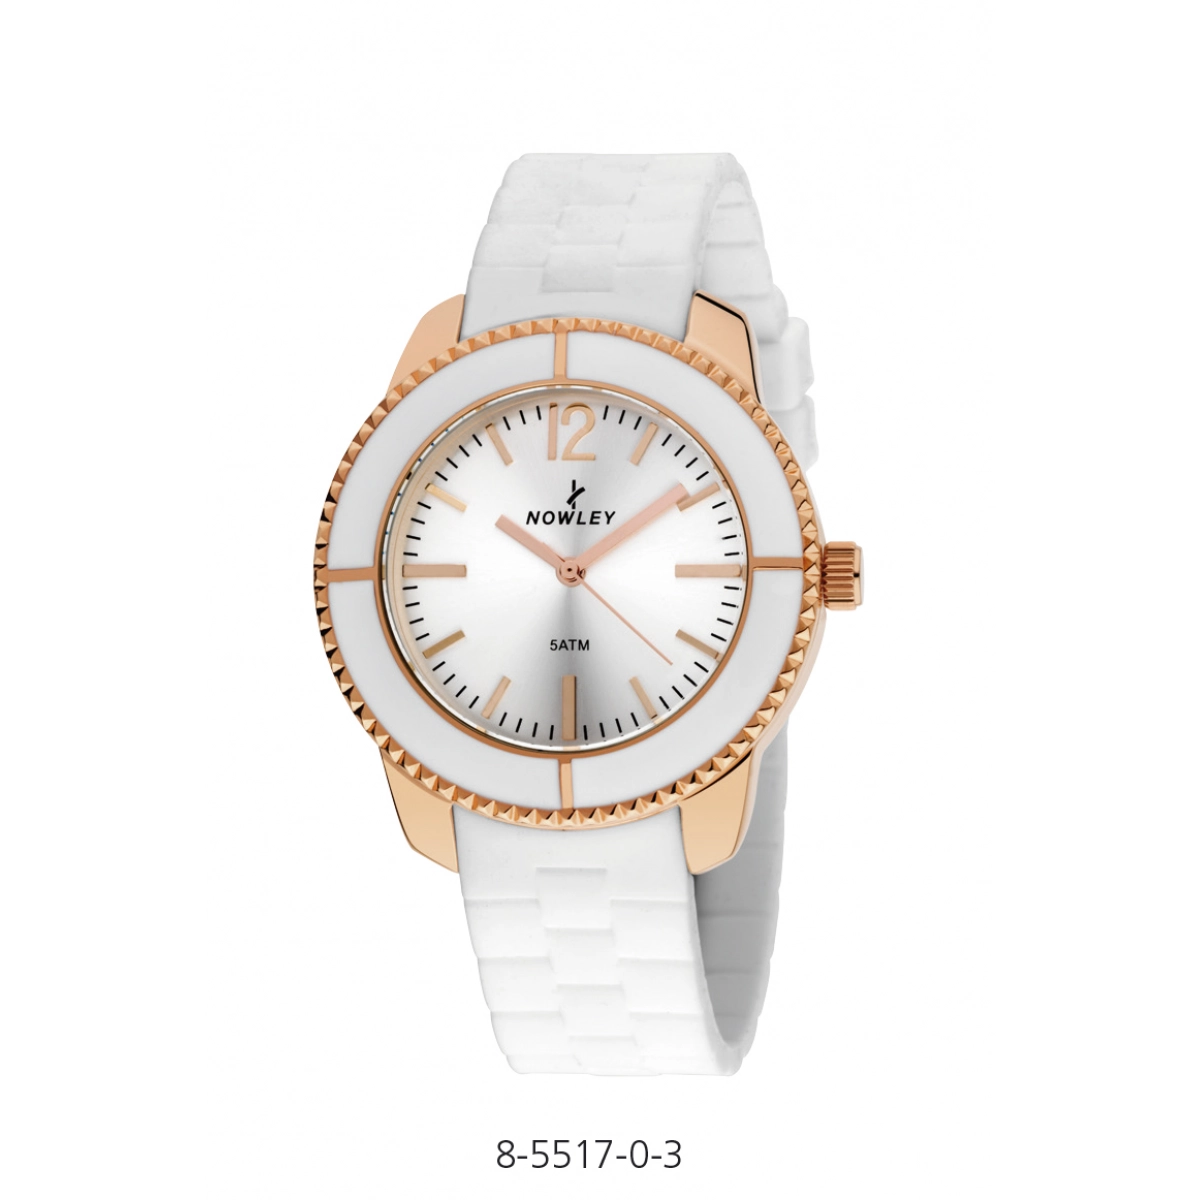 WATCH IS�ORA NOWLEY CHIC 8-5517-0-3